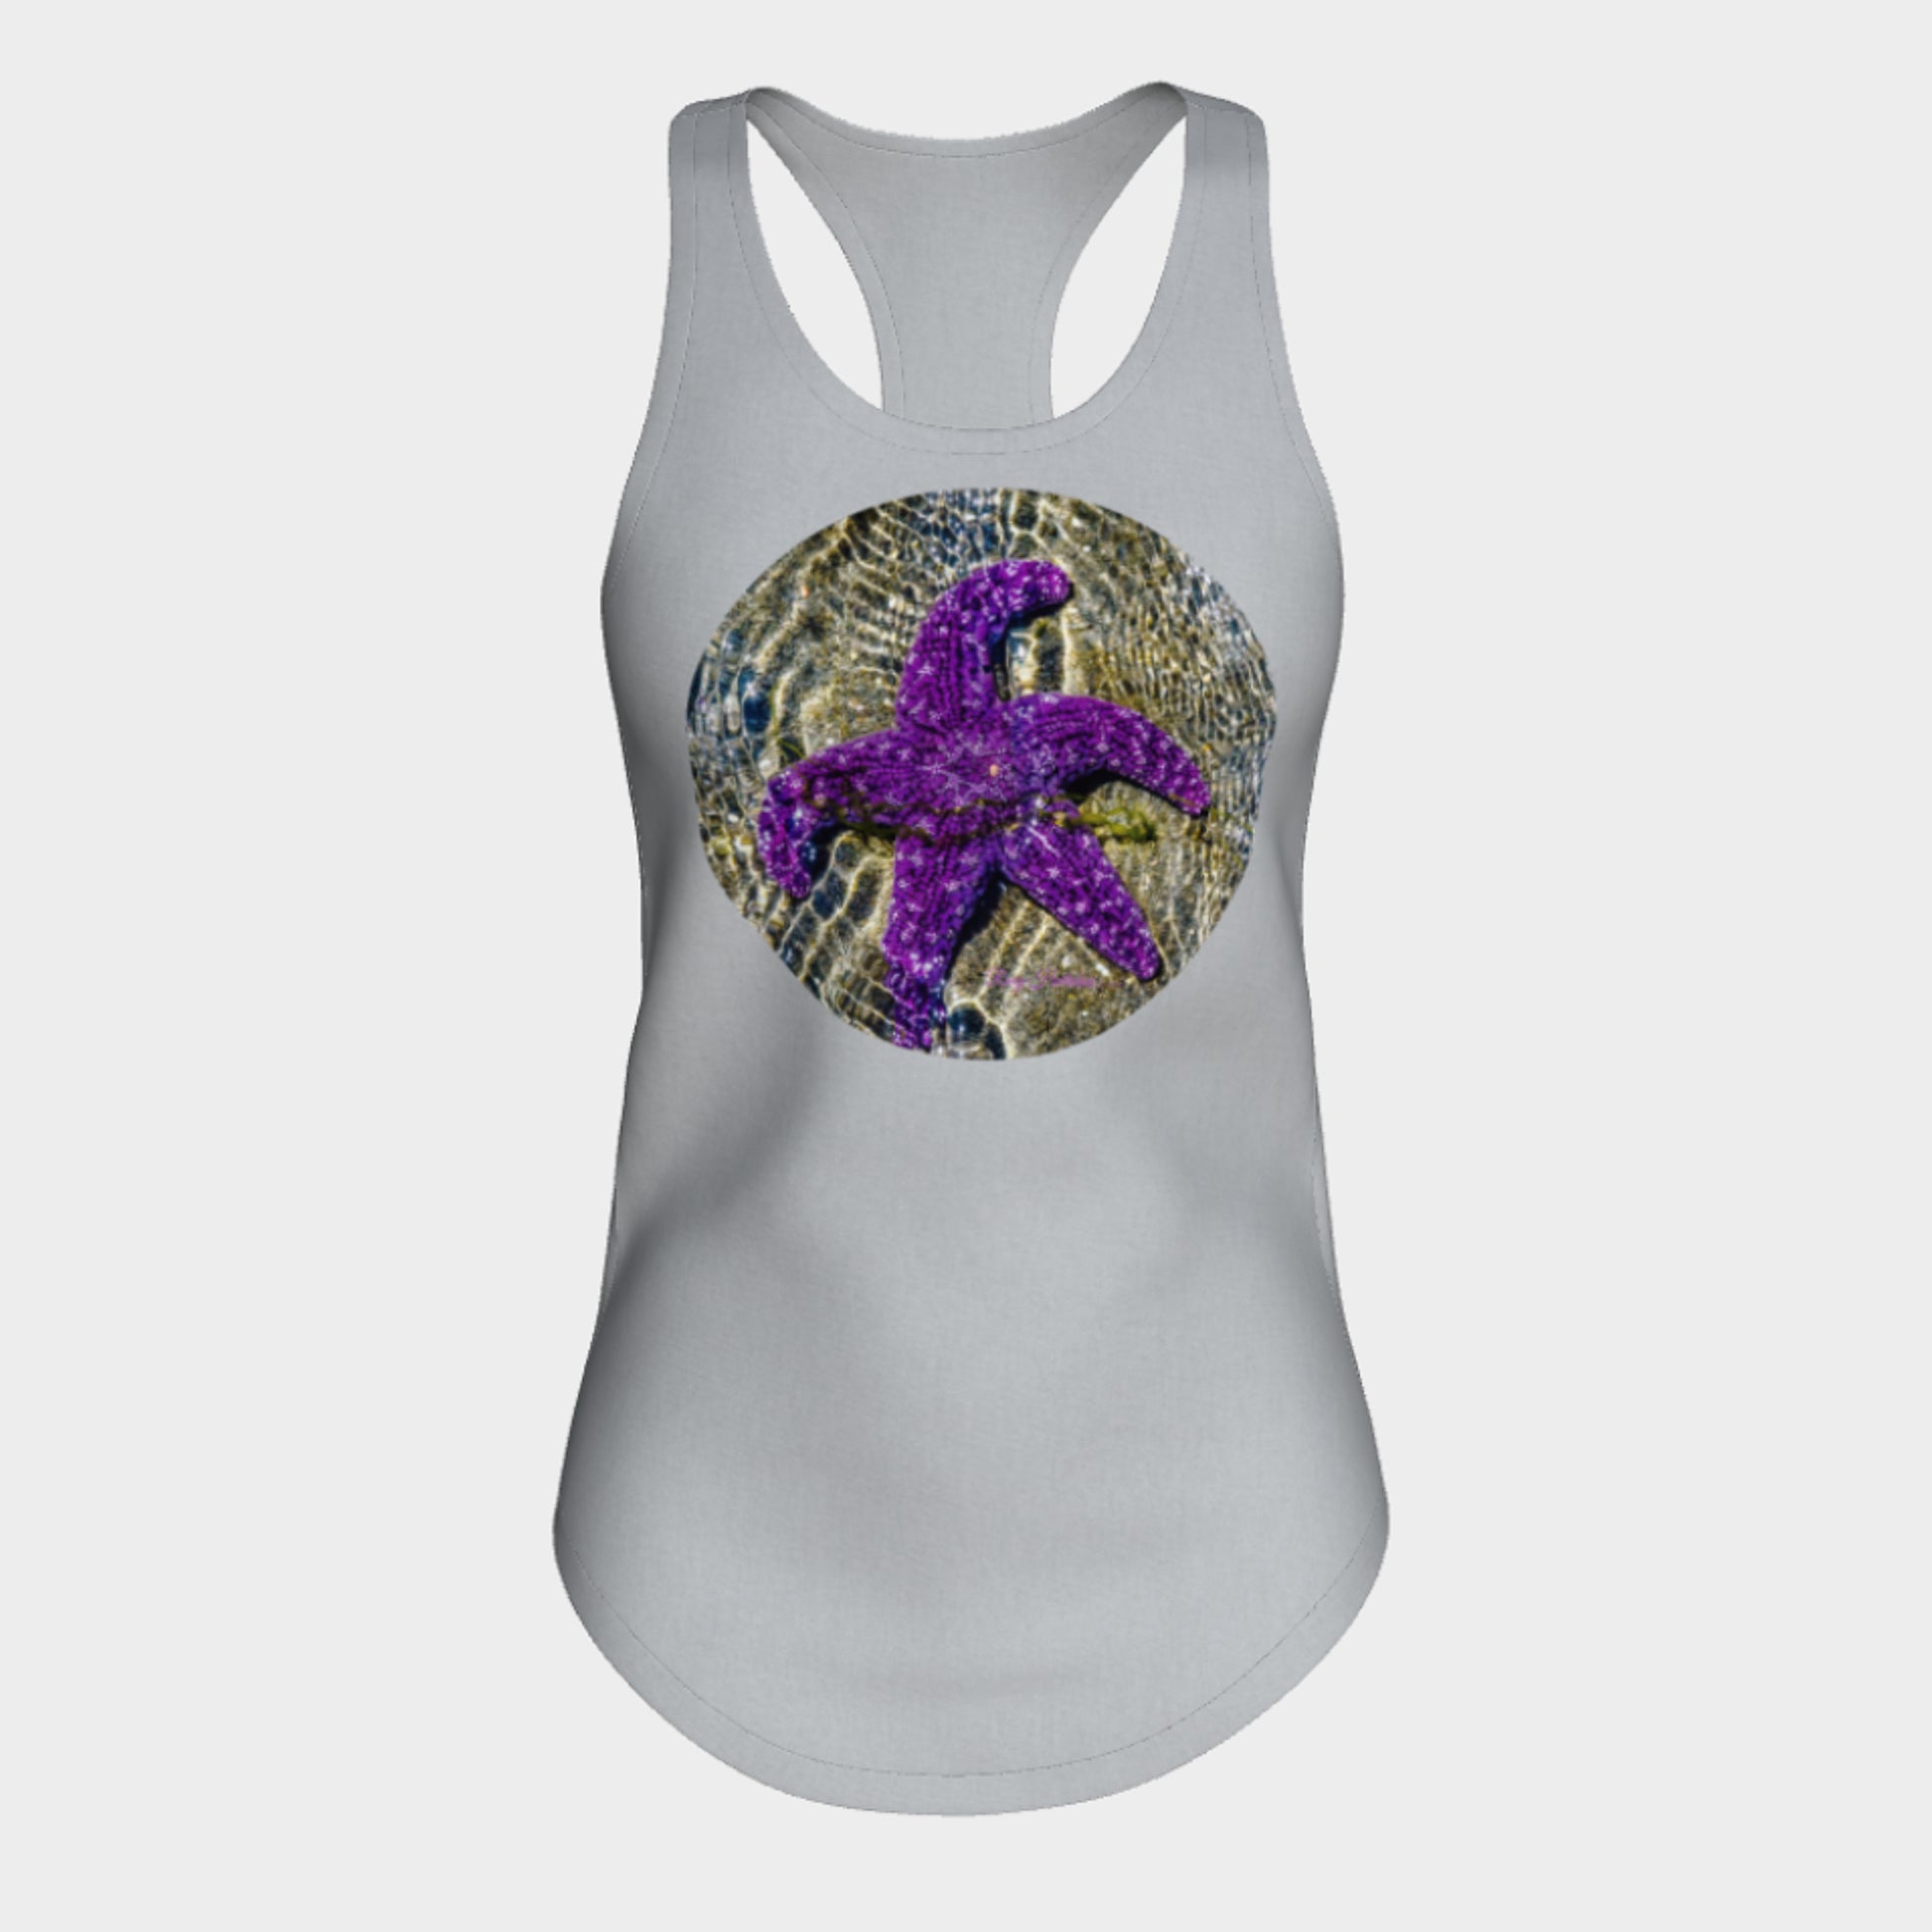 Last Day In May Starfish Racerback Tank Top  Excellent choice for the summer or for working out. 